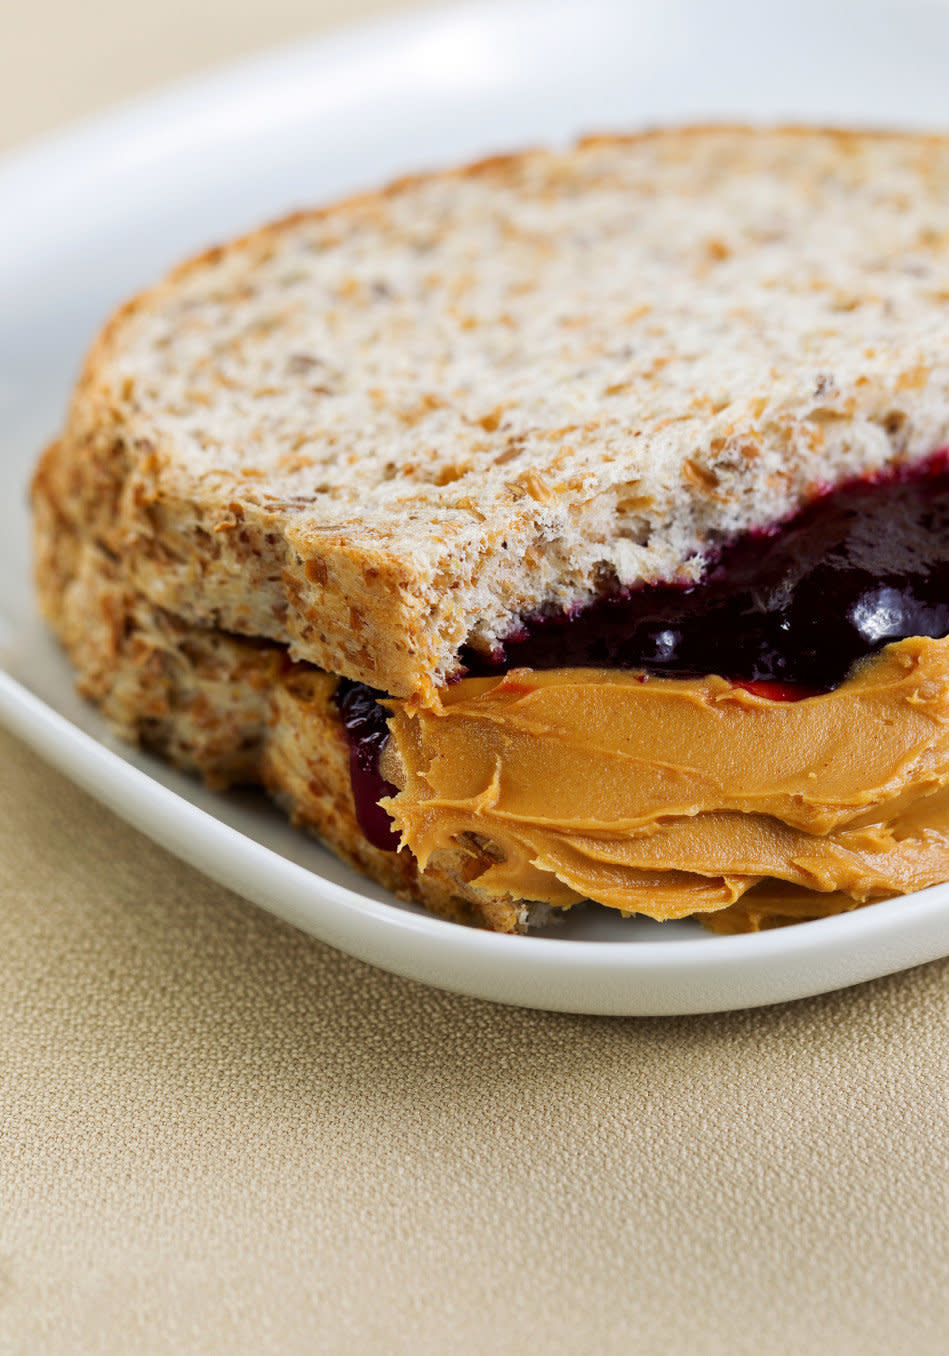 The ideal midday meal includes protein and fiber, and isn't too high in refined carbs. On days when that just didn't happen, try a late-afternoon do-over, albeit one that won't ruin you for dinner in three hours. Half of a classic <strong>peanut butter and jelly sandwich</strong> can do the trick, since it contains <a href="http://www.oprah.com/food/Healthy-Snacks-Nutritionists-Eat/2" target="_blank">fiber and protein</a>. Bonus points for using whole grain bread, low-sugar jelly and PB made from just two ingredients: peanuts and salt.